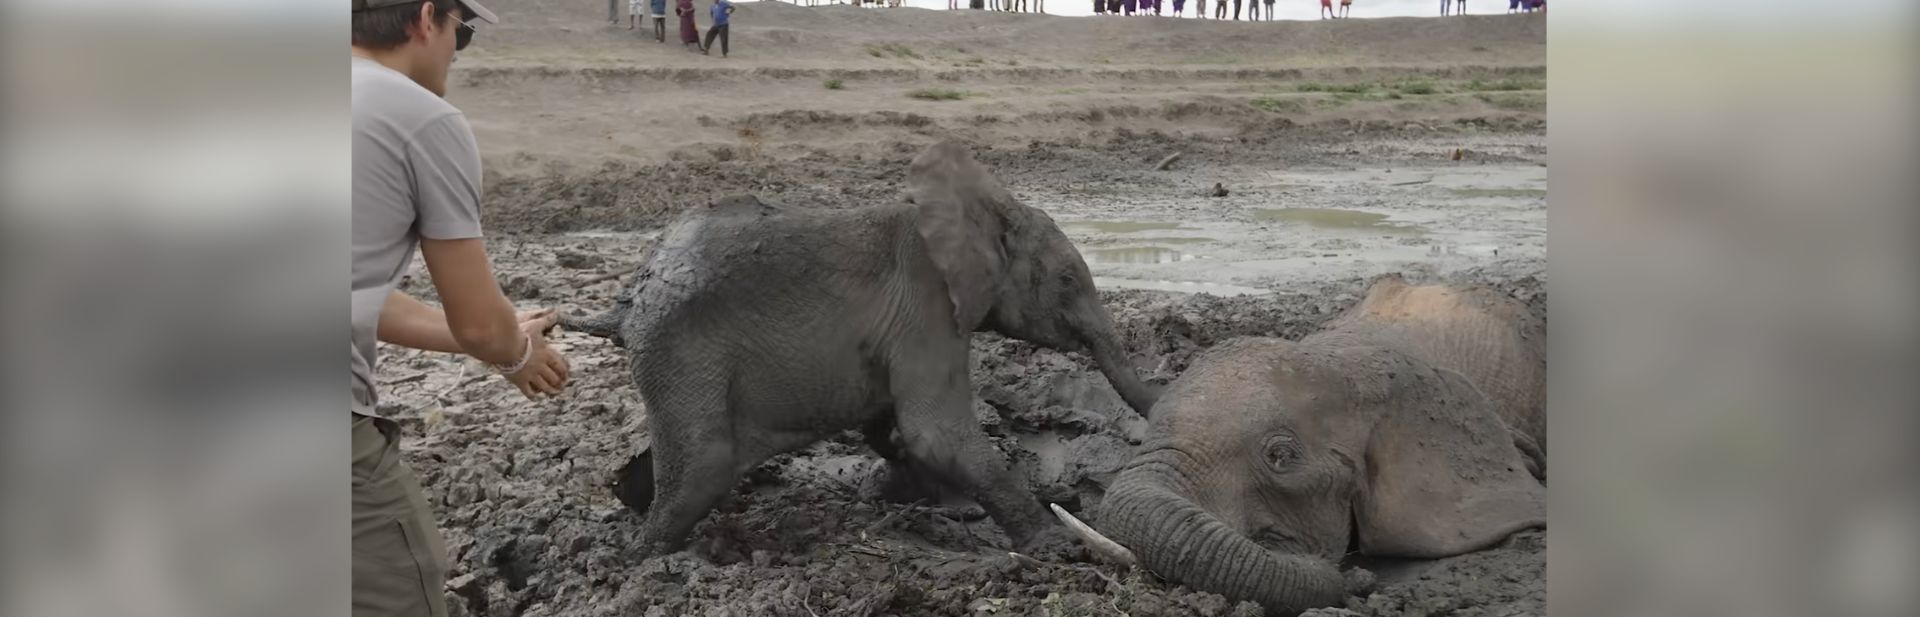 Brave Baby Elephant Stays by His Mother in Daring Mud Rescue